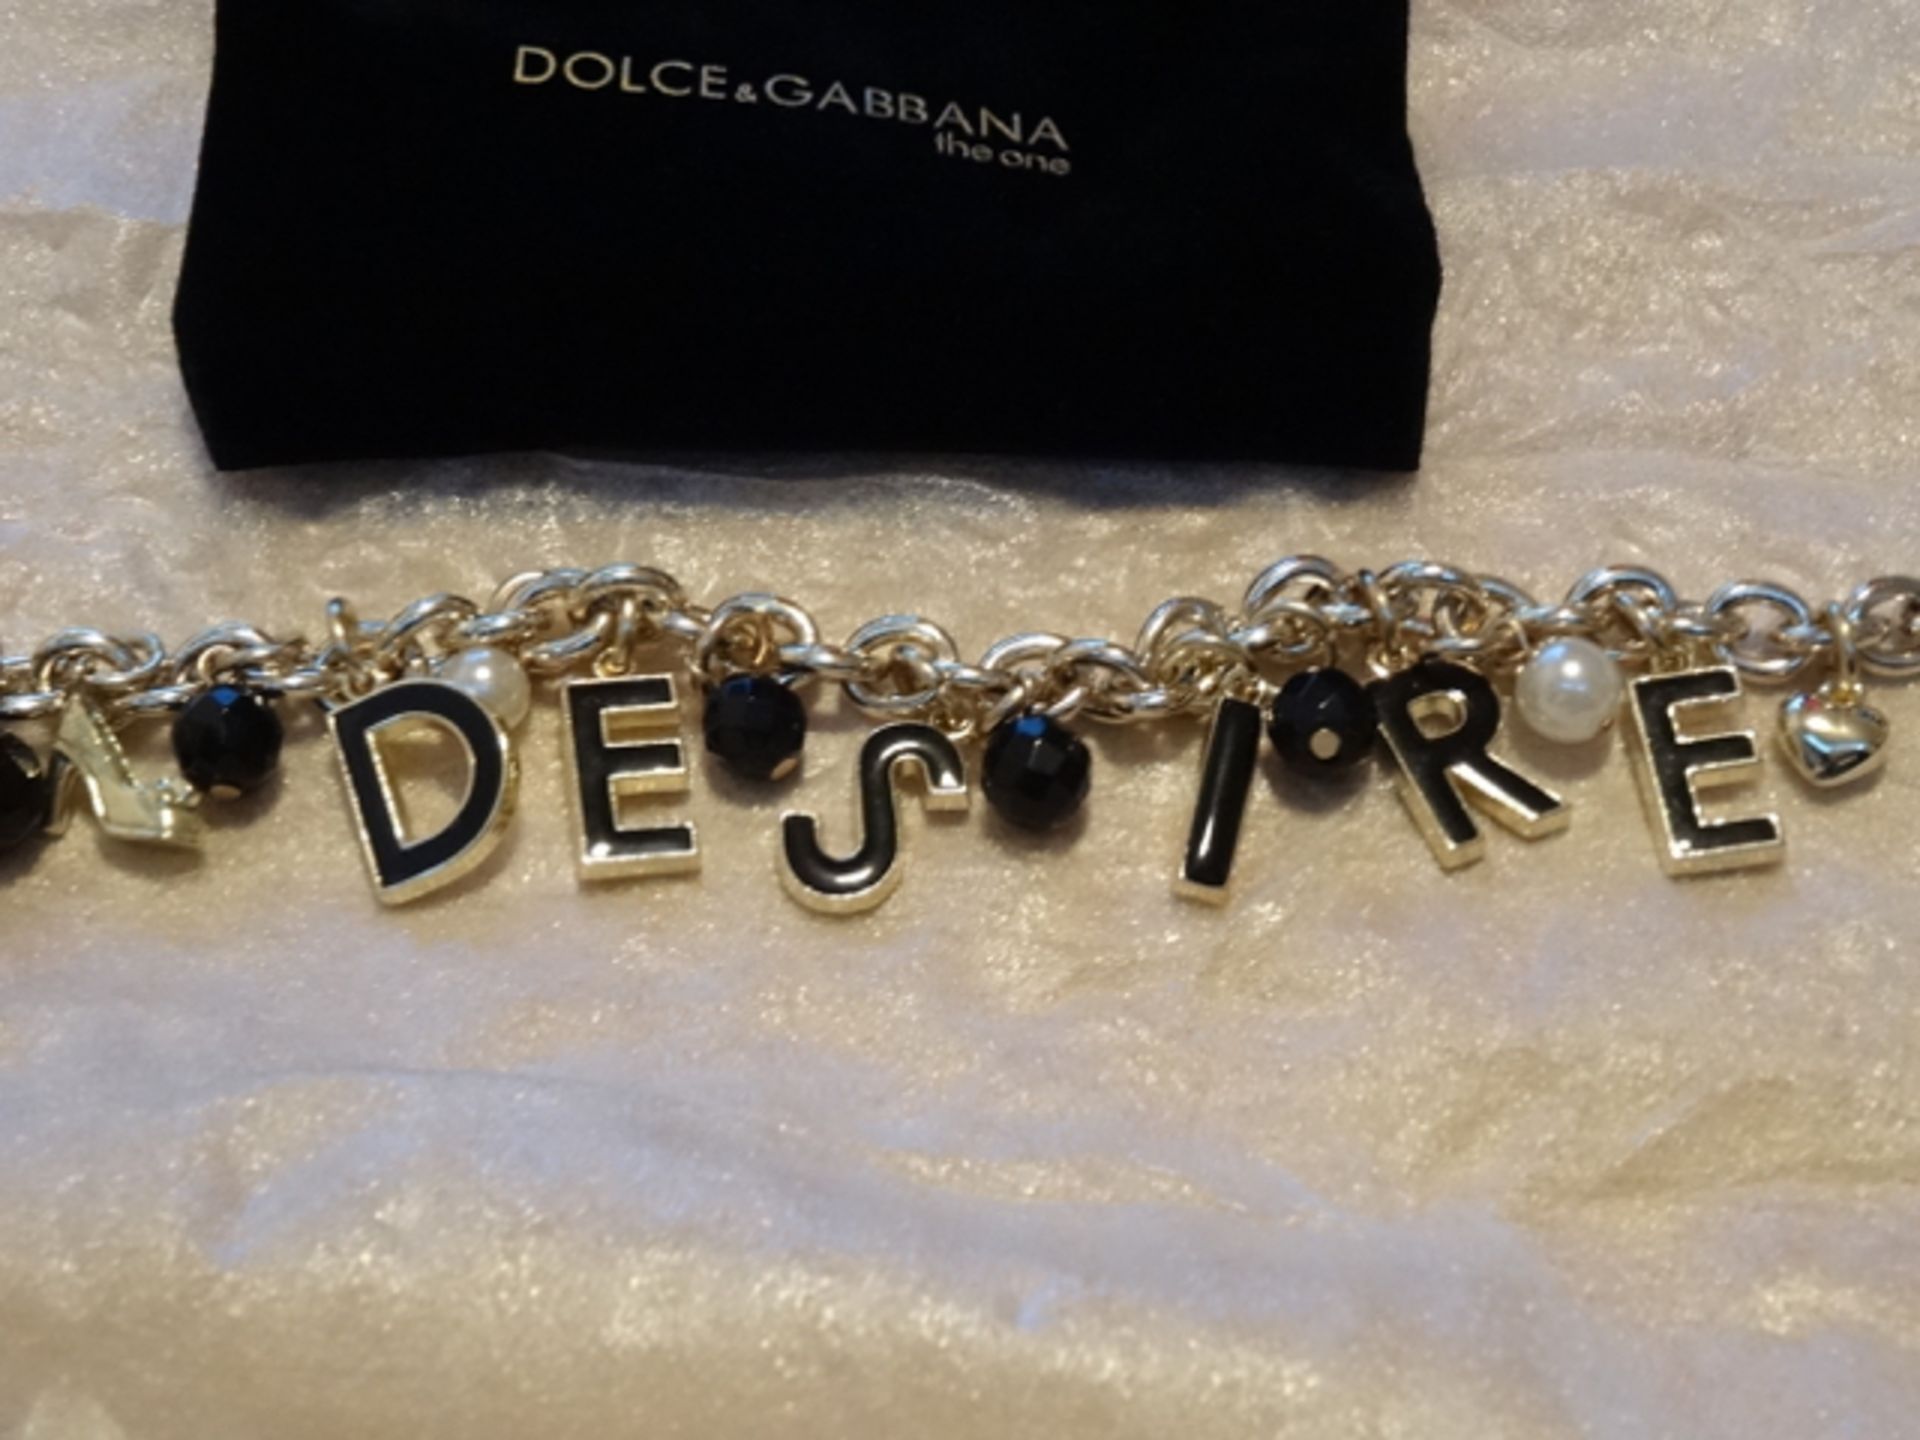 1 x Dolce & Gabbana 'The one' Desire bracelet. Great Christmas gift! Final price includes FREE